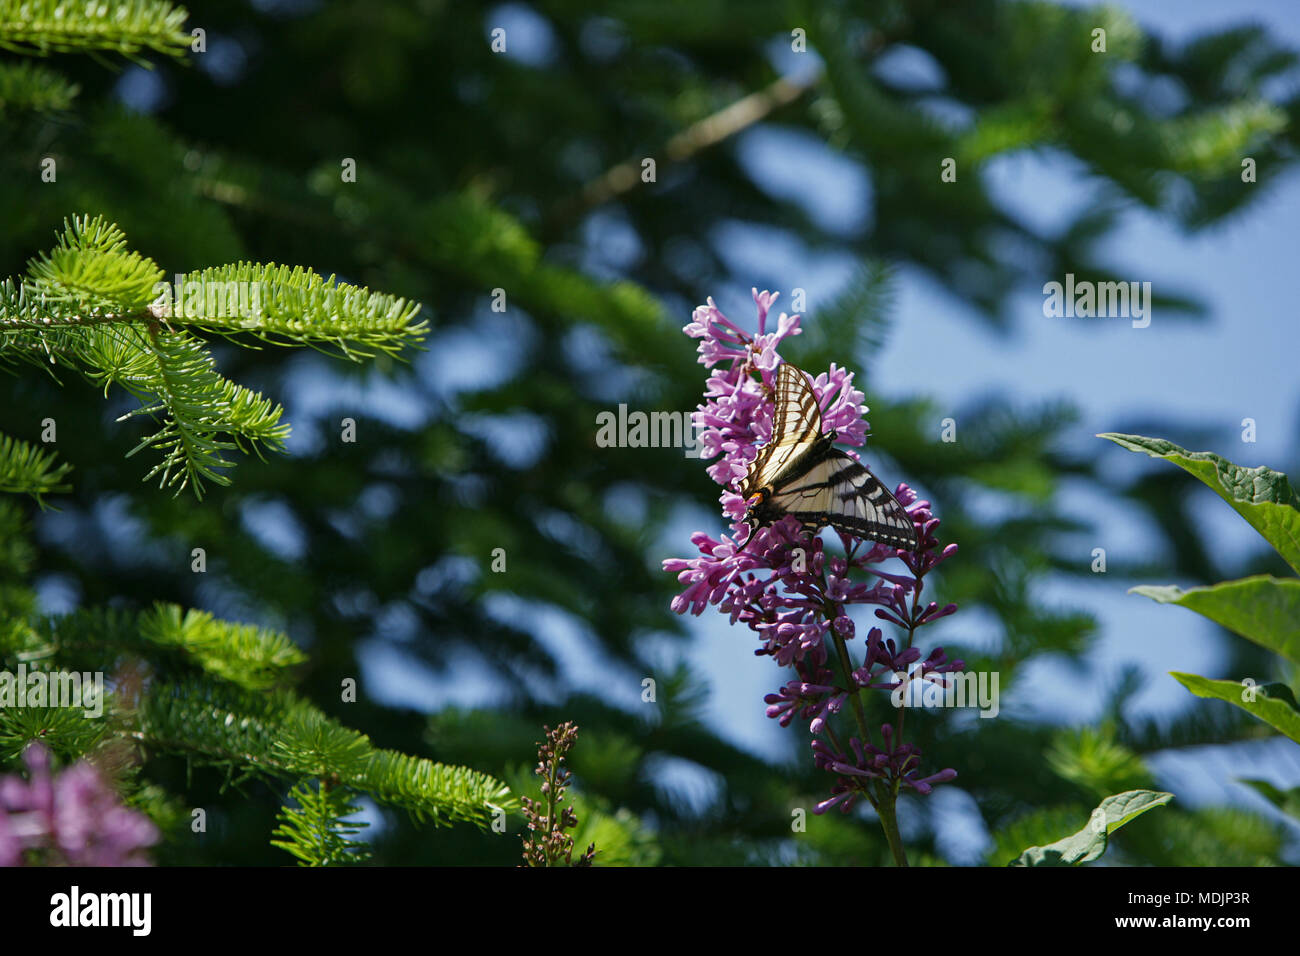 wild nature setting with pine trees, wild flowers and butterfly Stock Photo